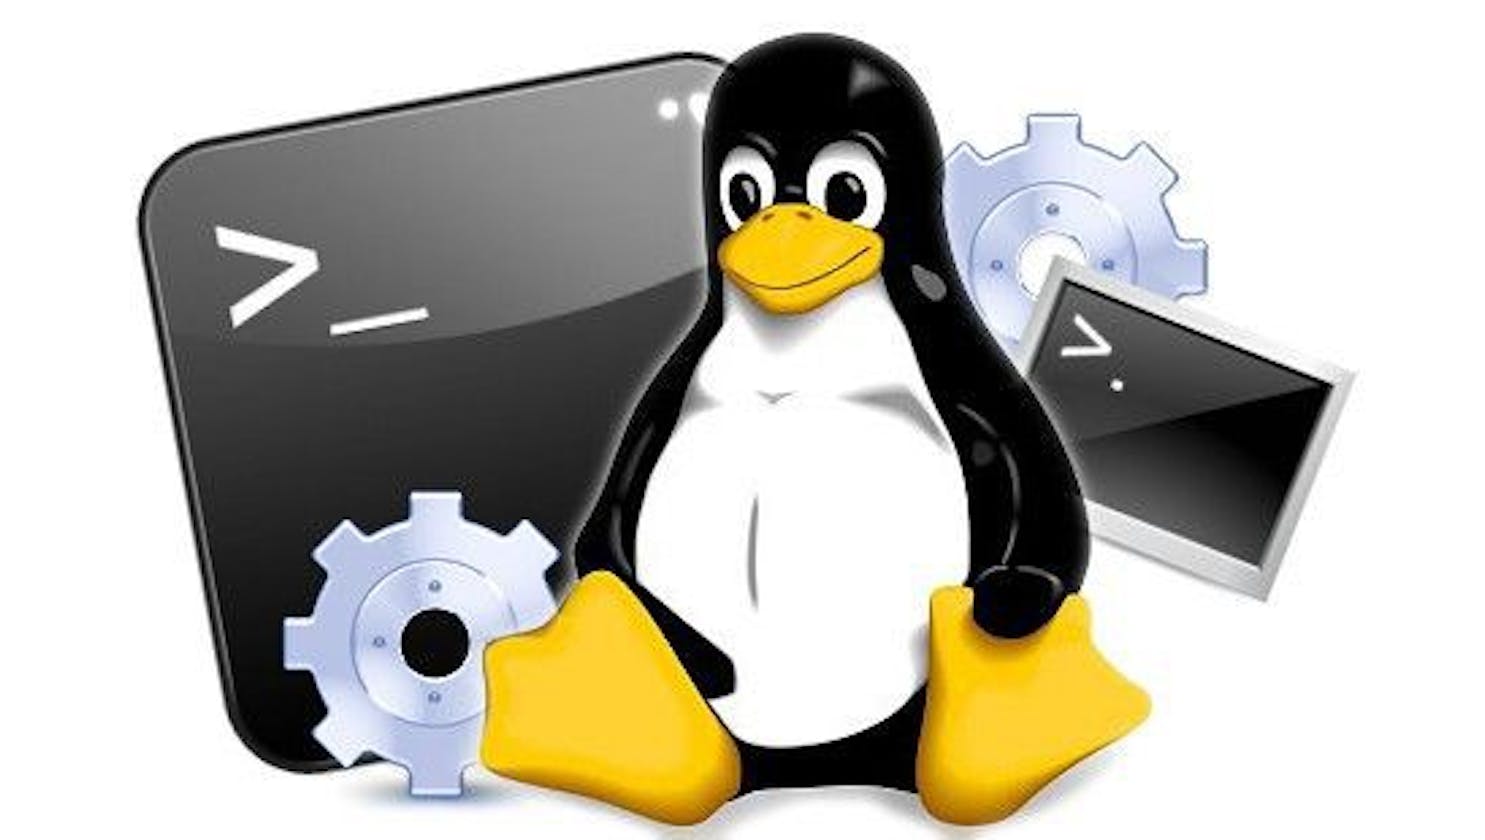 Linux OS - What is it?